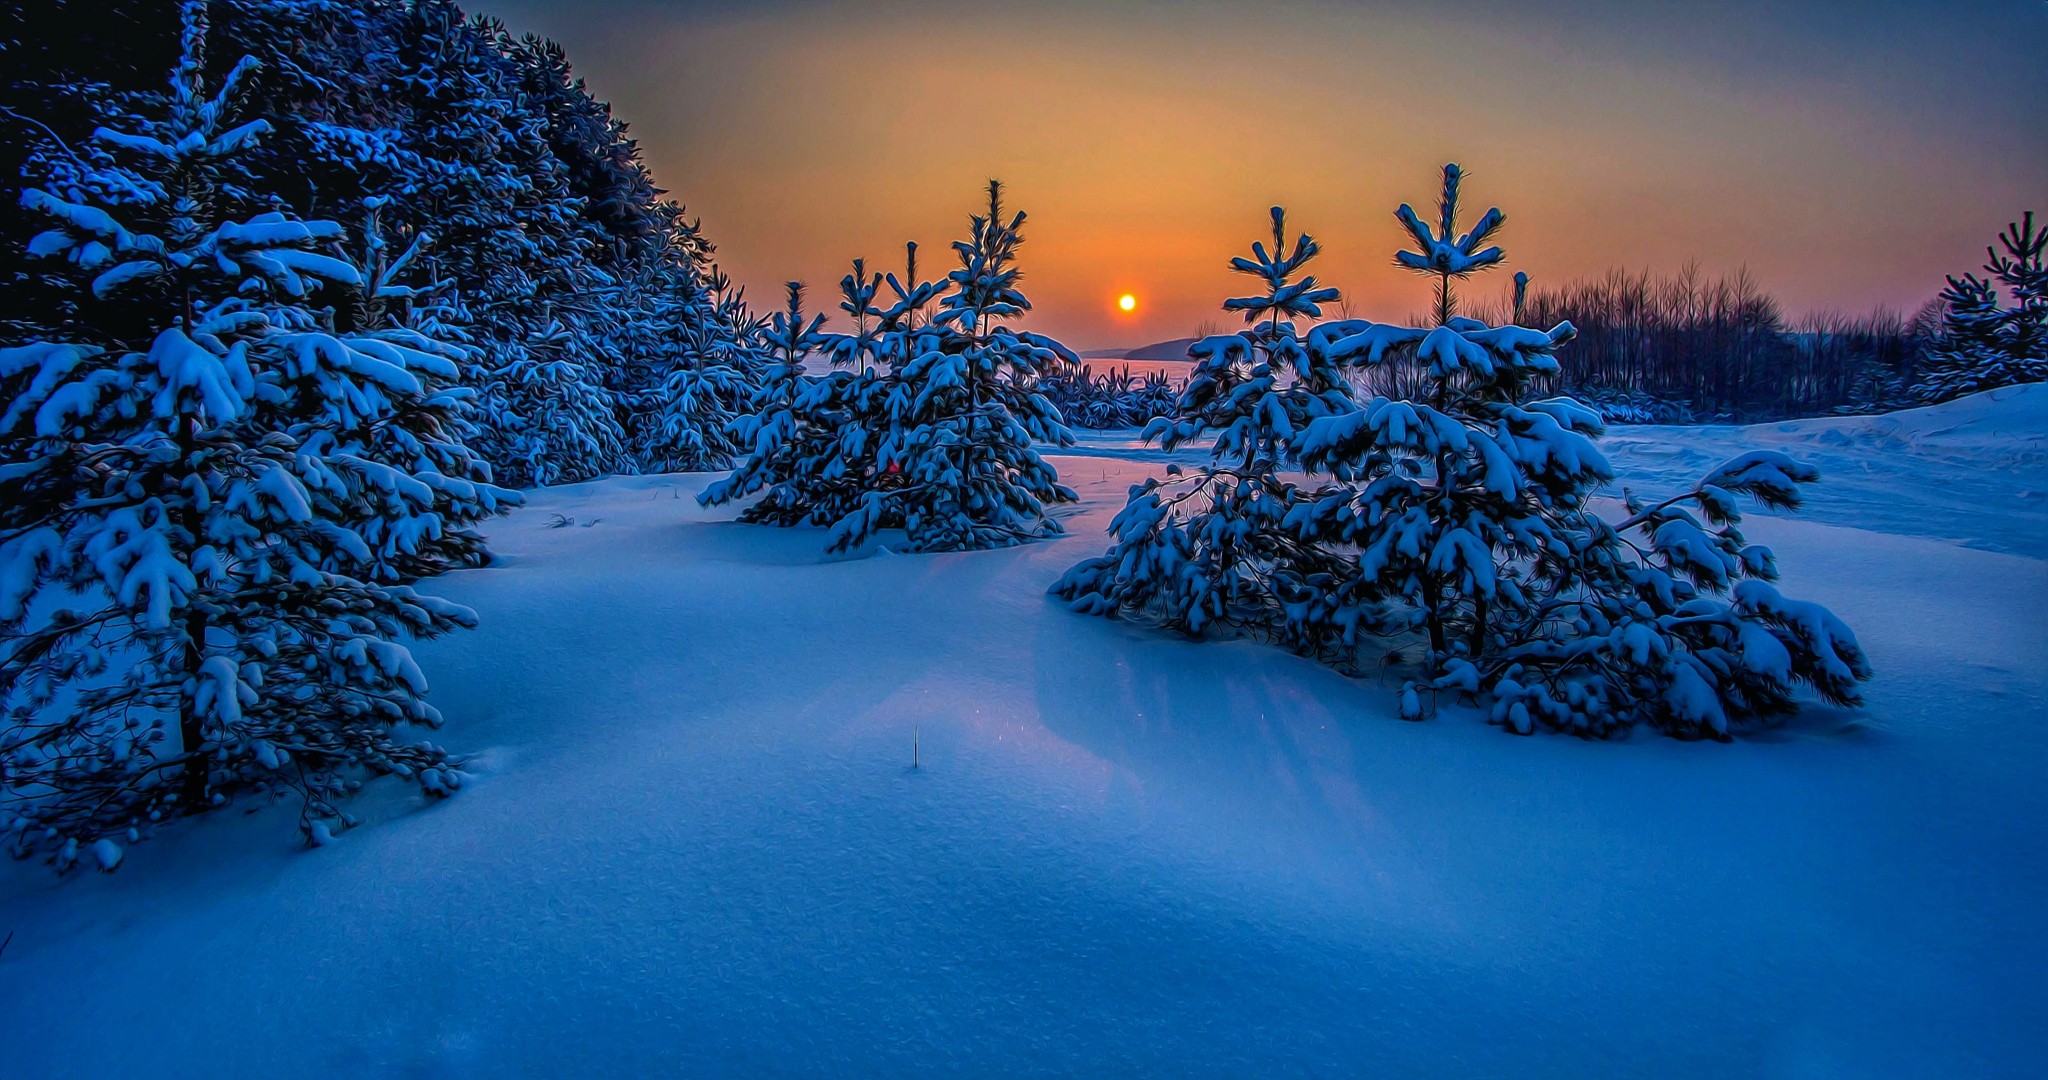 General 2048x1080 landscape snow winter trees nature sunset cold sea blue Russia